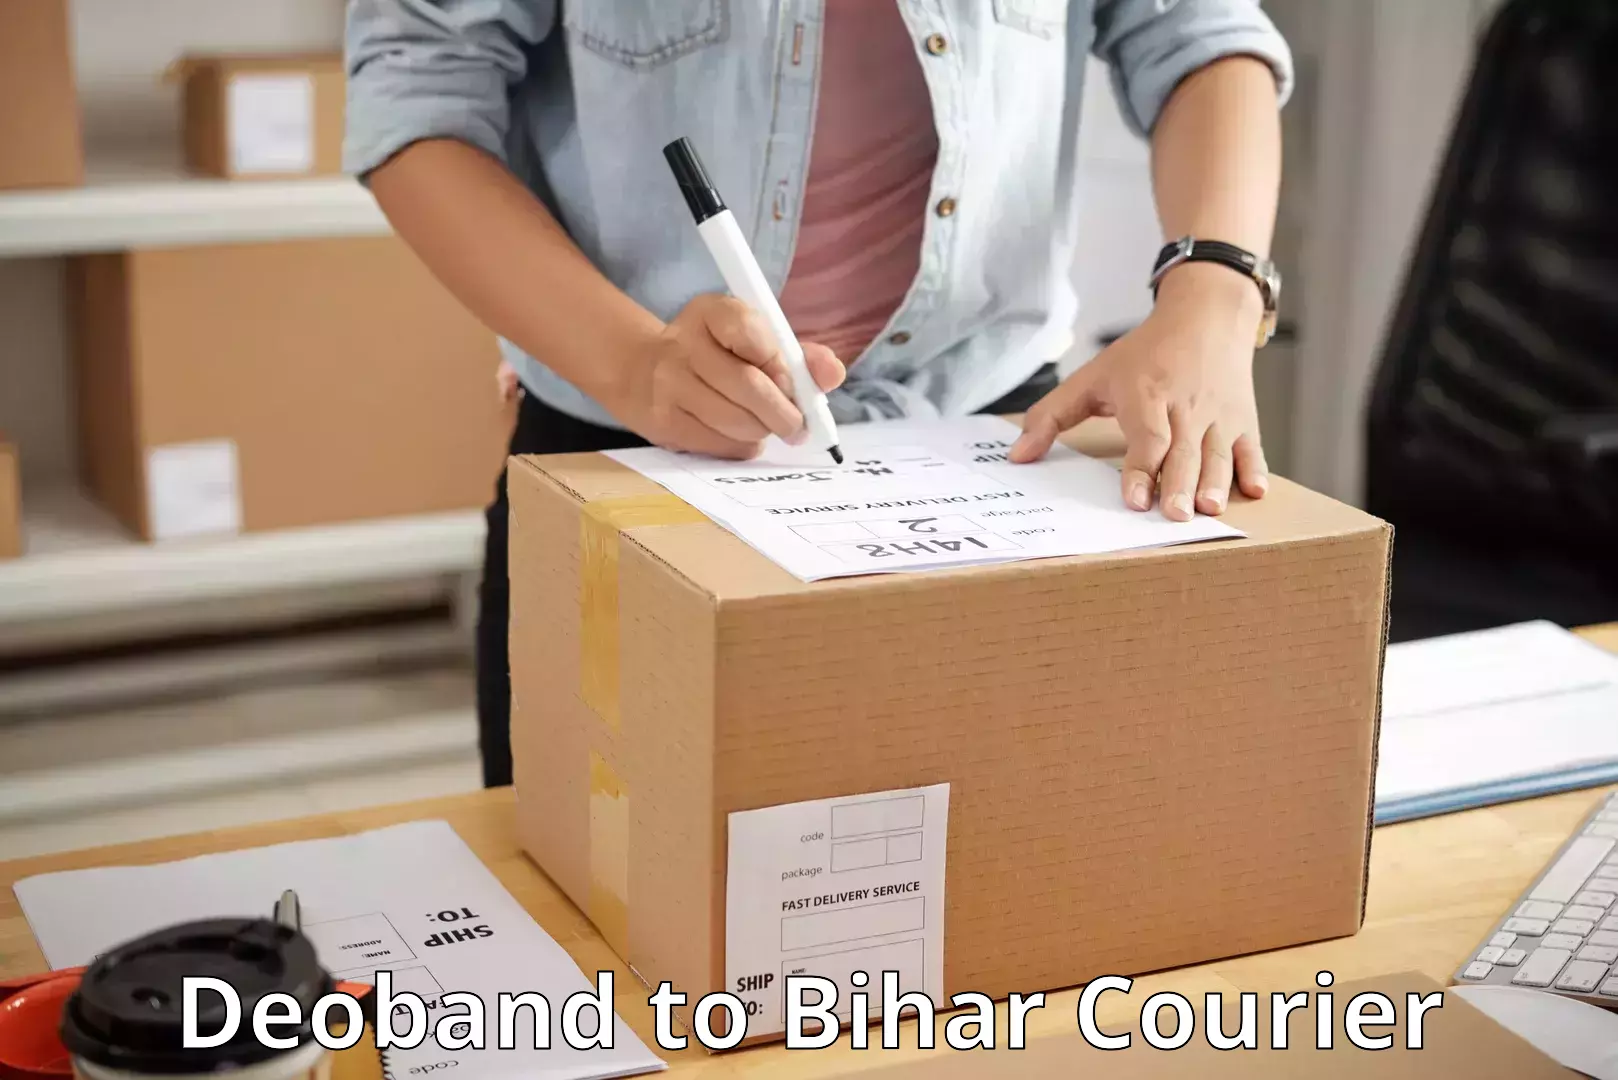 On-call courier service Deoband to Bihar